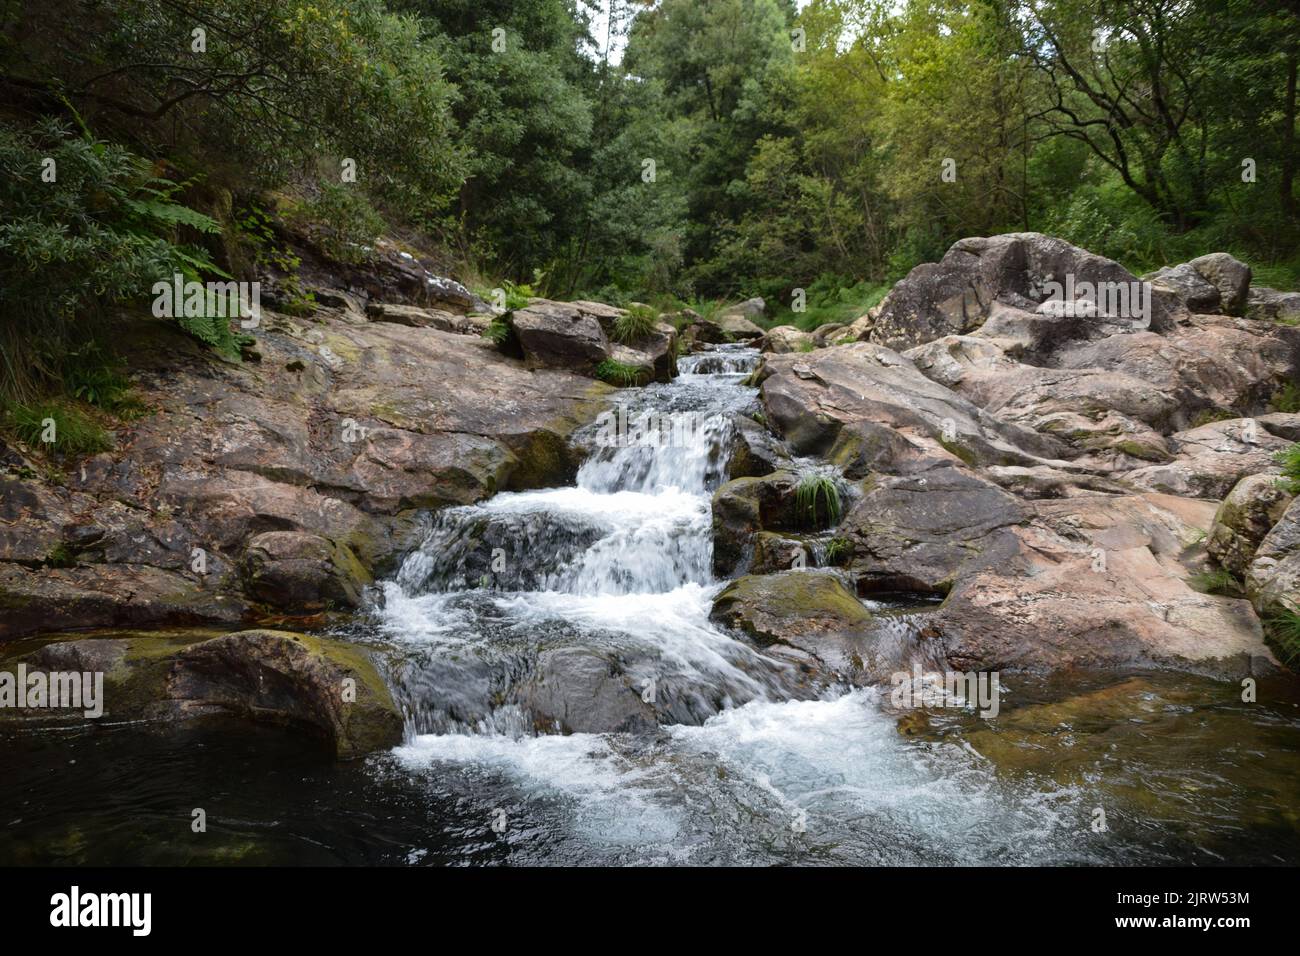 Small cascading waterfalls surrounded by trees in Galicia - Spain Stock Photo